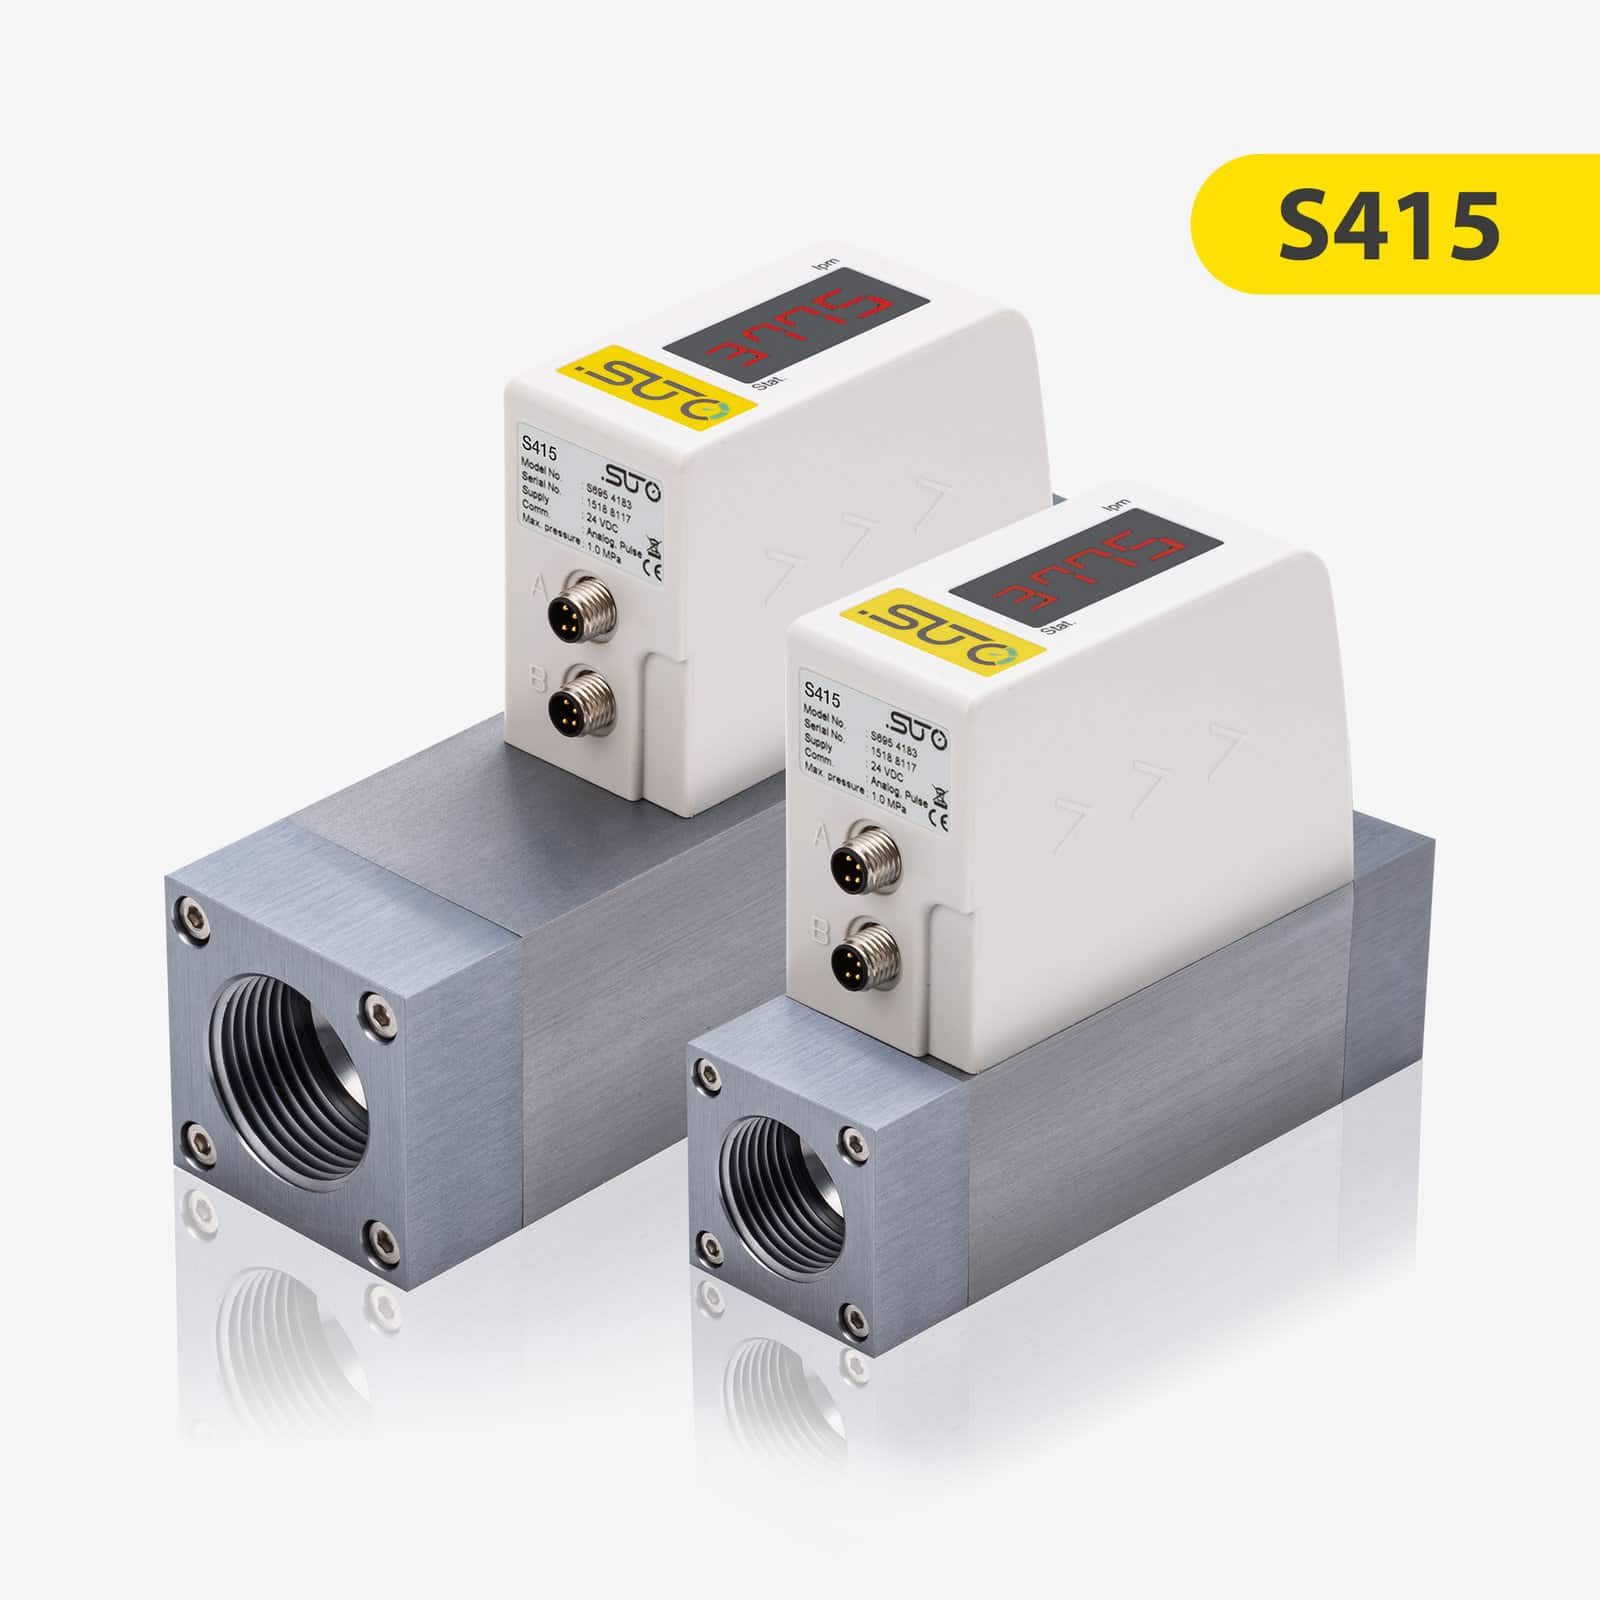 S415 Compact Flow Meter for Compressed Air and Nitrogen (Eco-Inline)